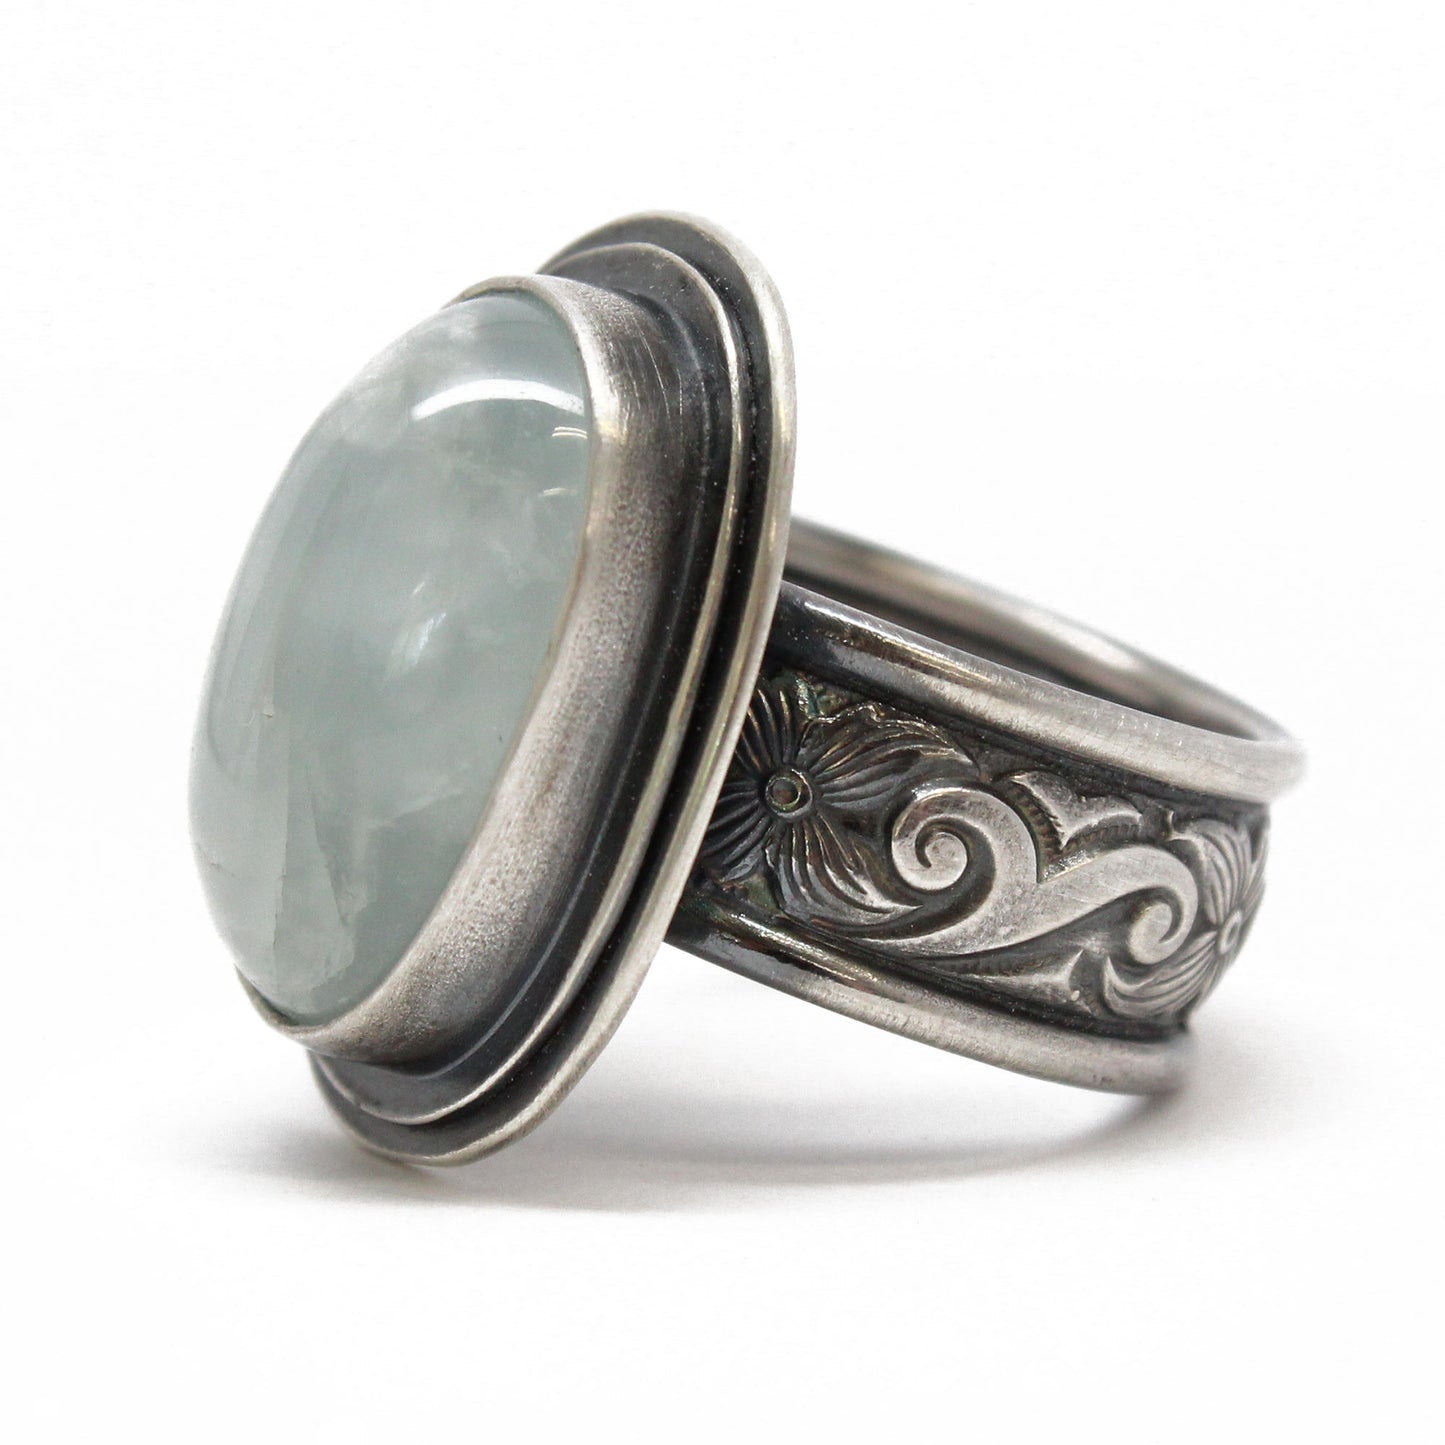 Load image into Gallery viewer, Aquamarine Ring in 925 Sterling Silver, Size 8 US
